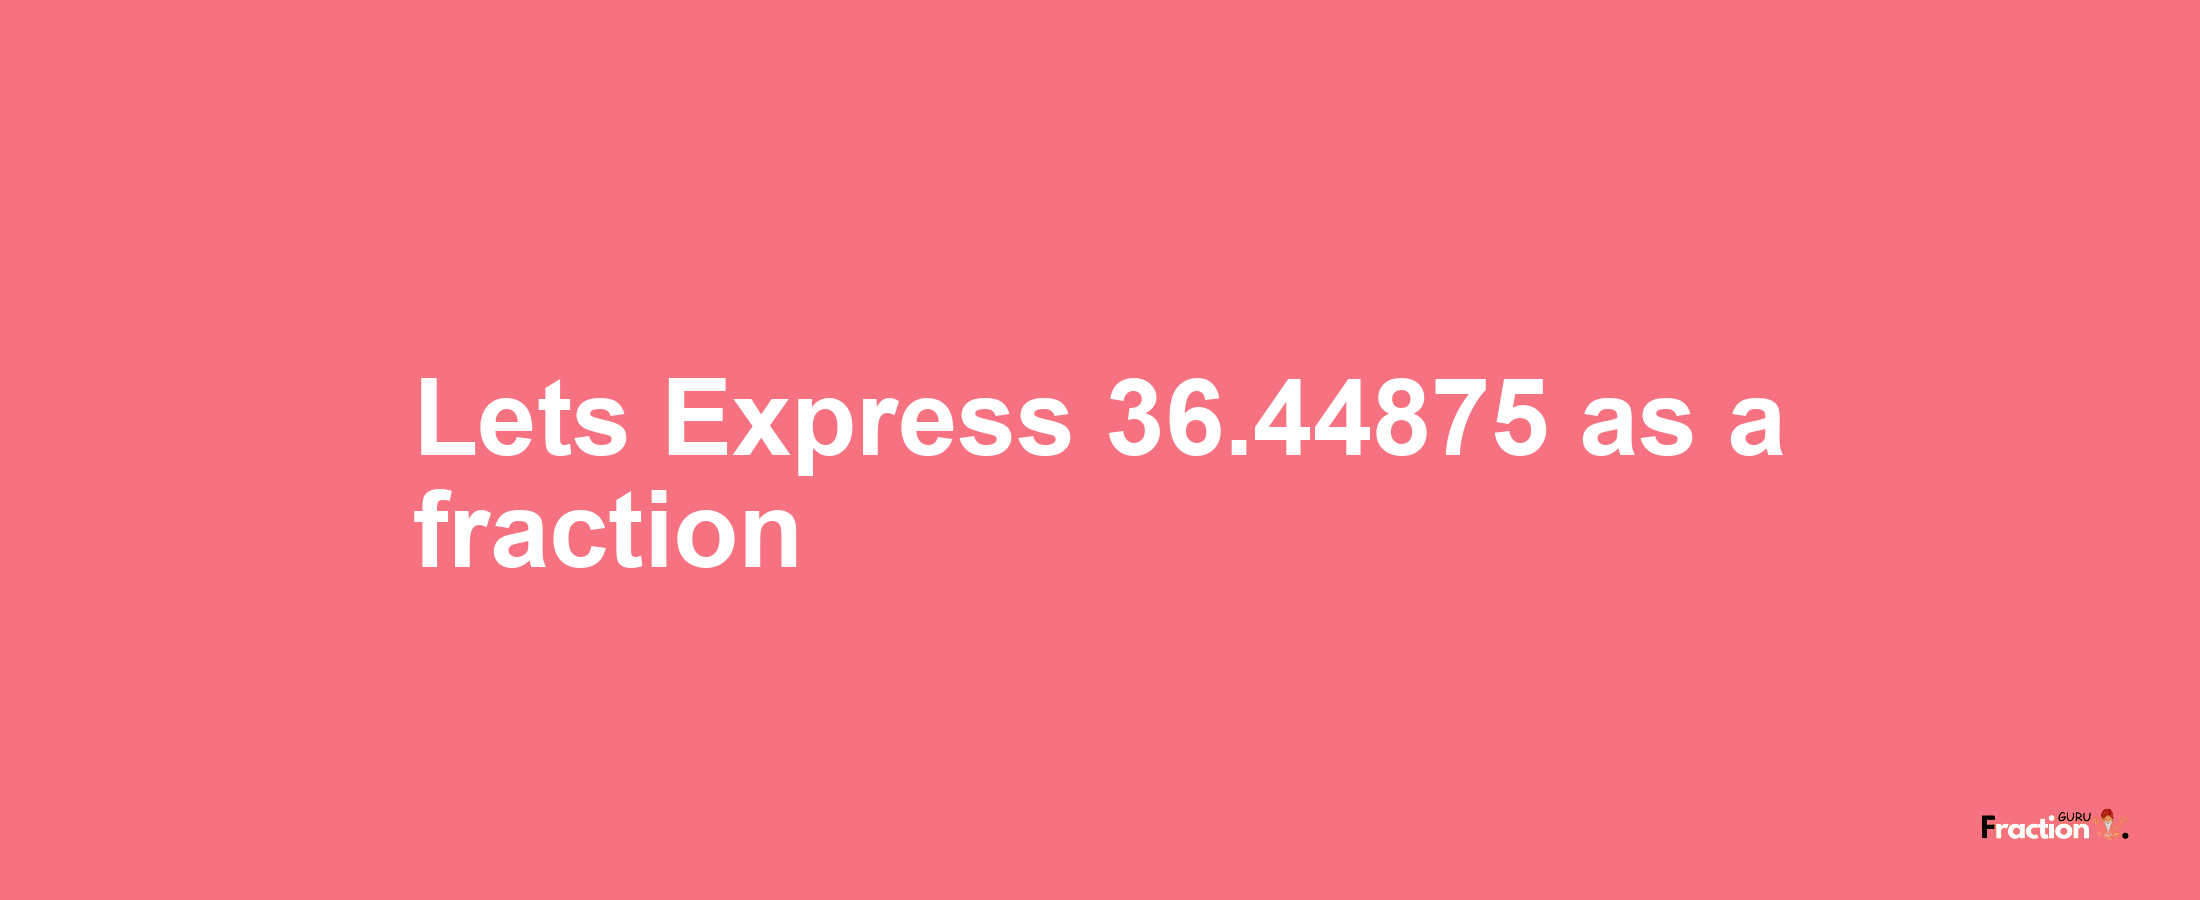 Lets Express 36.44875 as afraction